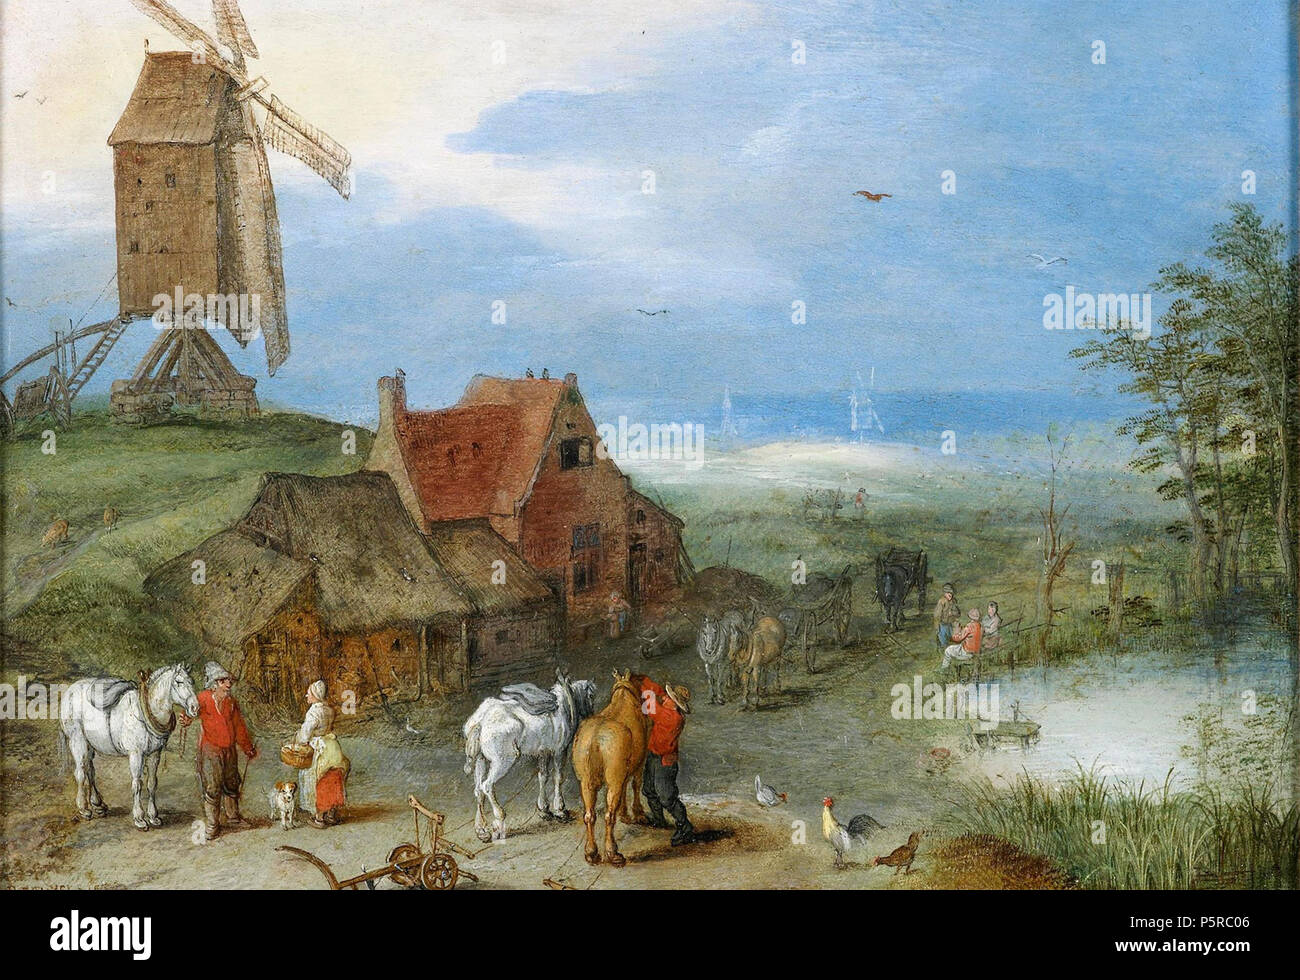 N/A. English: Landscape with a Windmill, Figures and Horses by a Farmstead by Jan Brueghel the Elder, 1606, oil on copper, 4 5/8 x 6 5/8 in. (11.8 x 16.7 cm.) . 1606. Jan Brueghel the Elder 243 Landscape with a Windmill, Figures and Horses by a Farmstead by Jan Brueghel the Elder Stock Photo